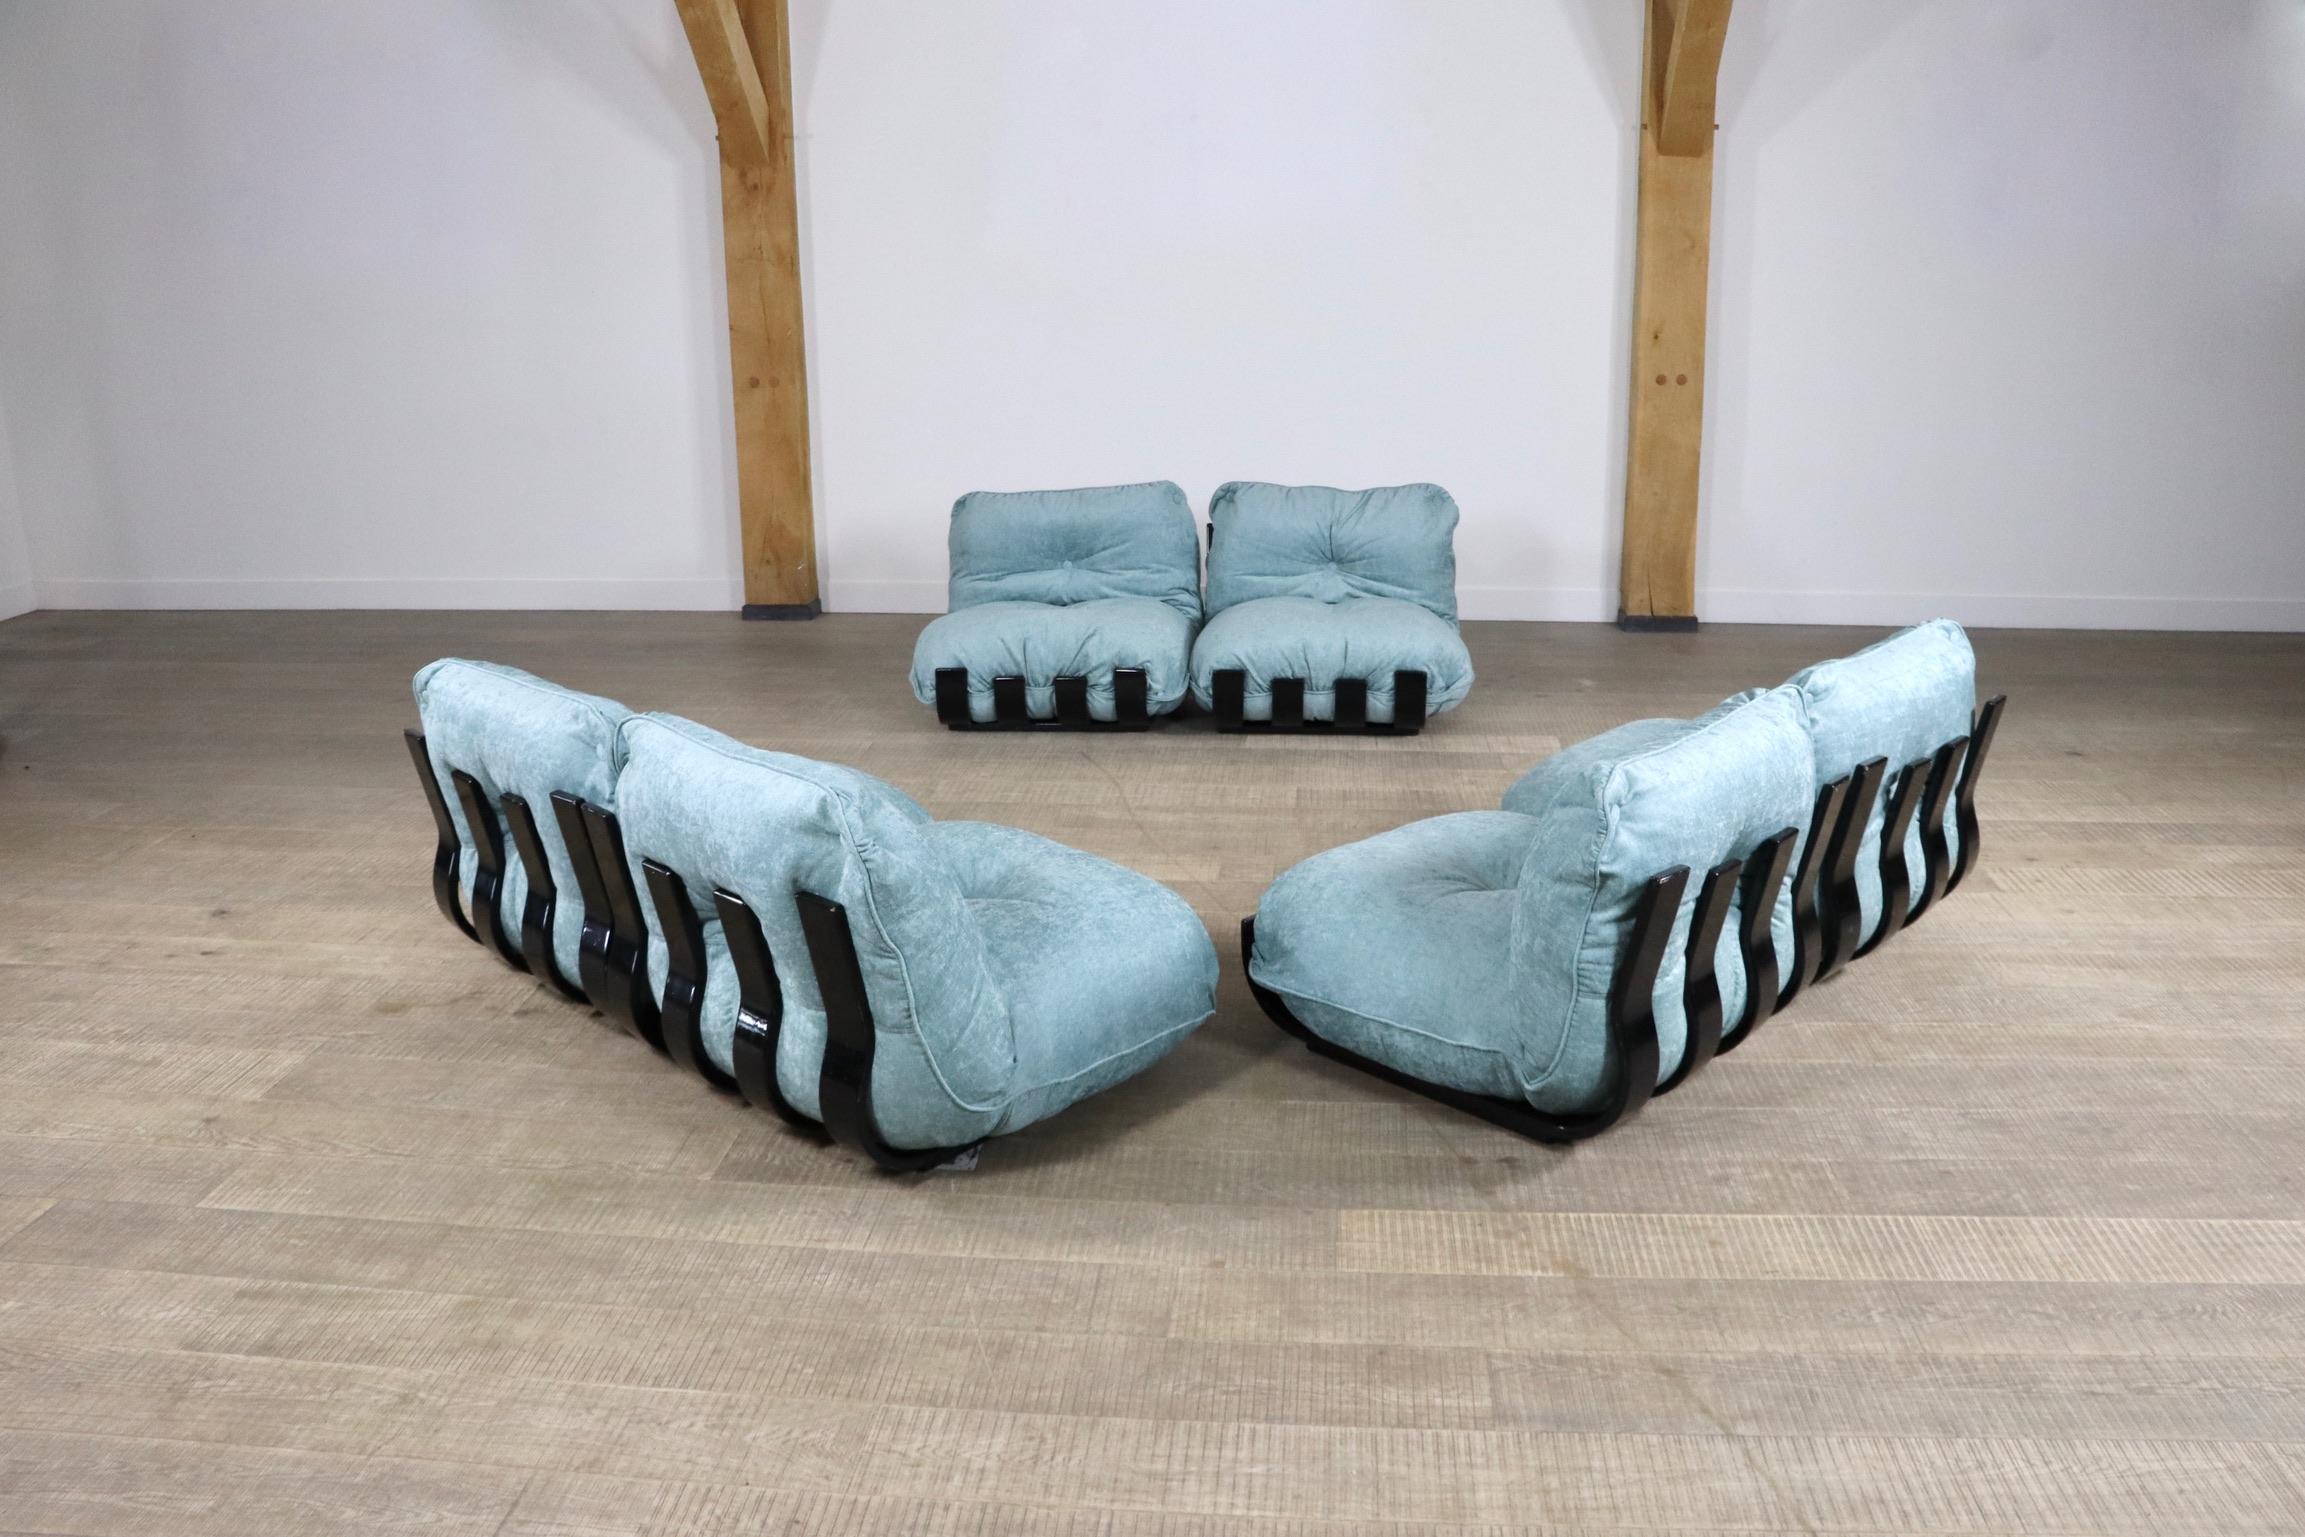 Sectional Gran Visir Sofa in Blue Velvet by Luciano Frigerio, Italy, 1970s For Sale 8